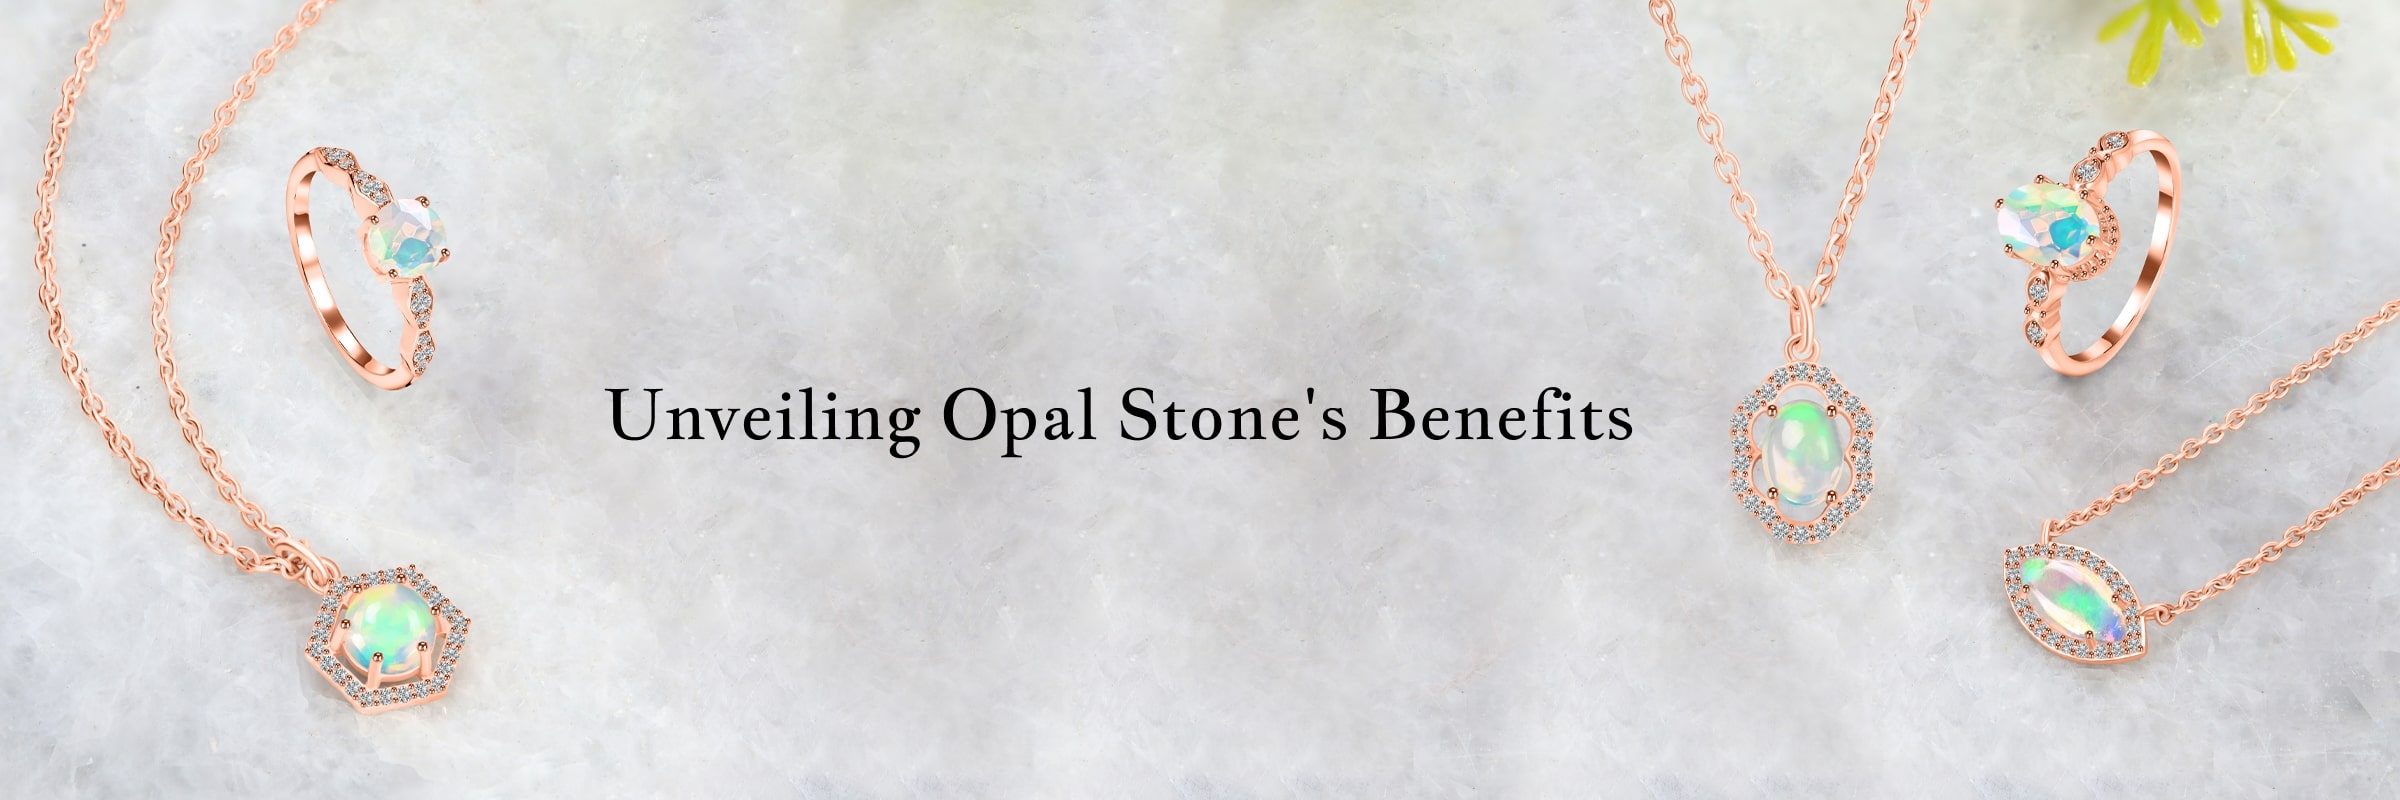 What are The Benefits of Opal Stone